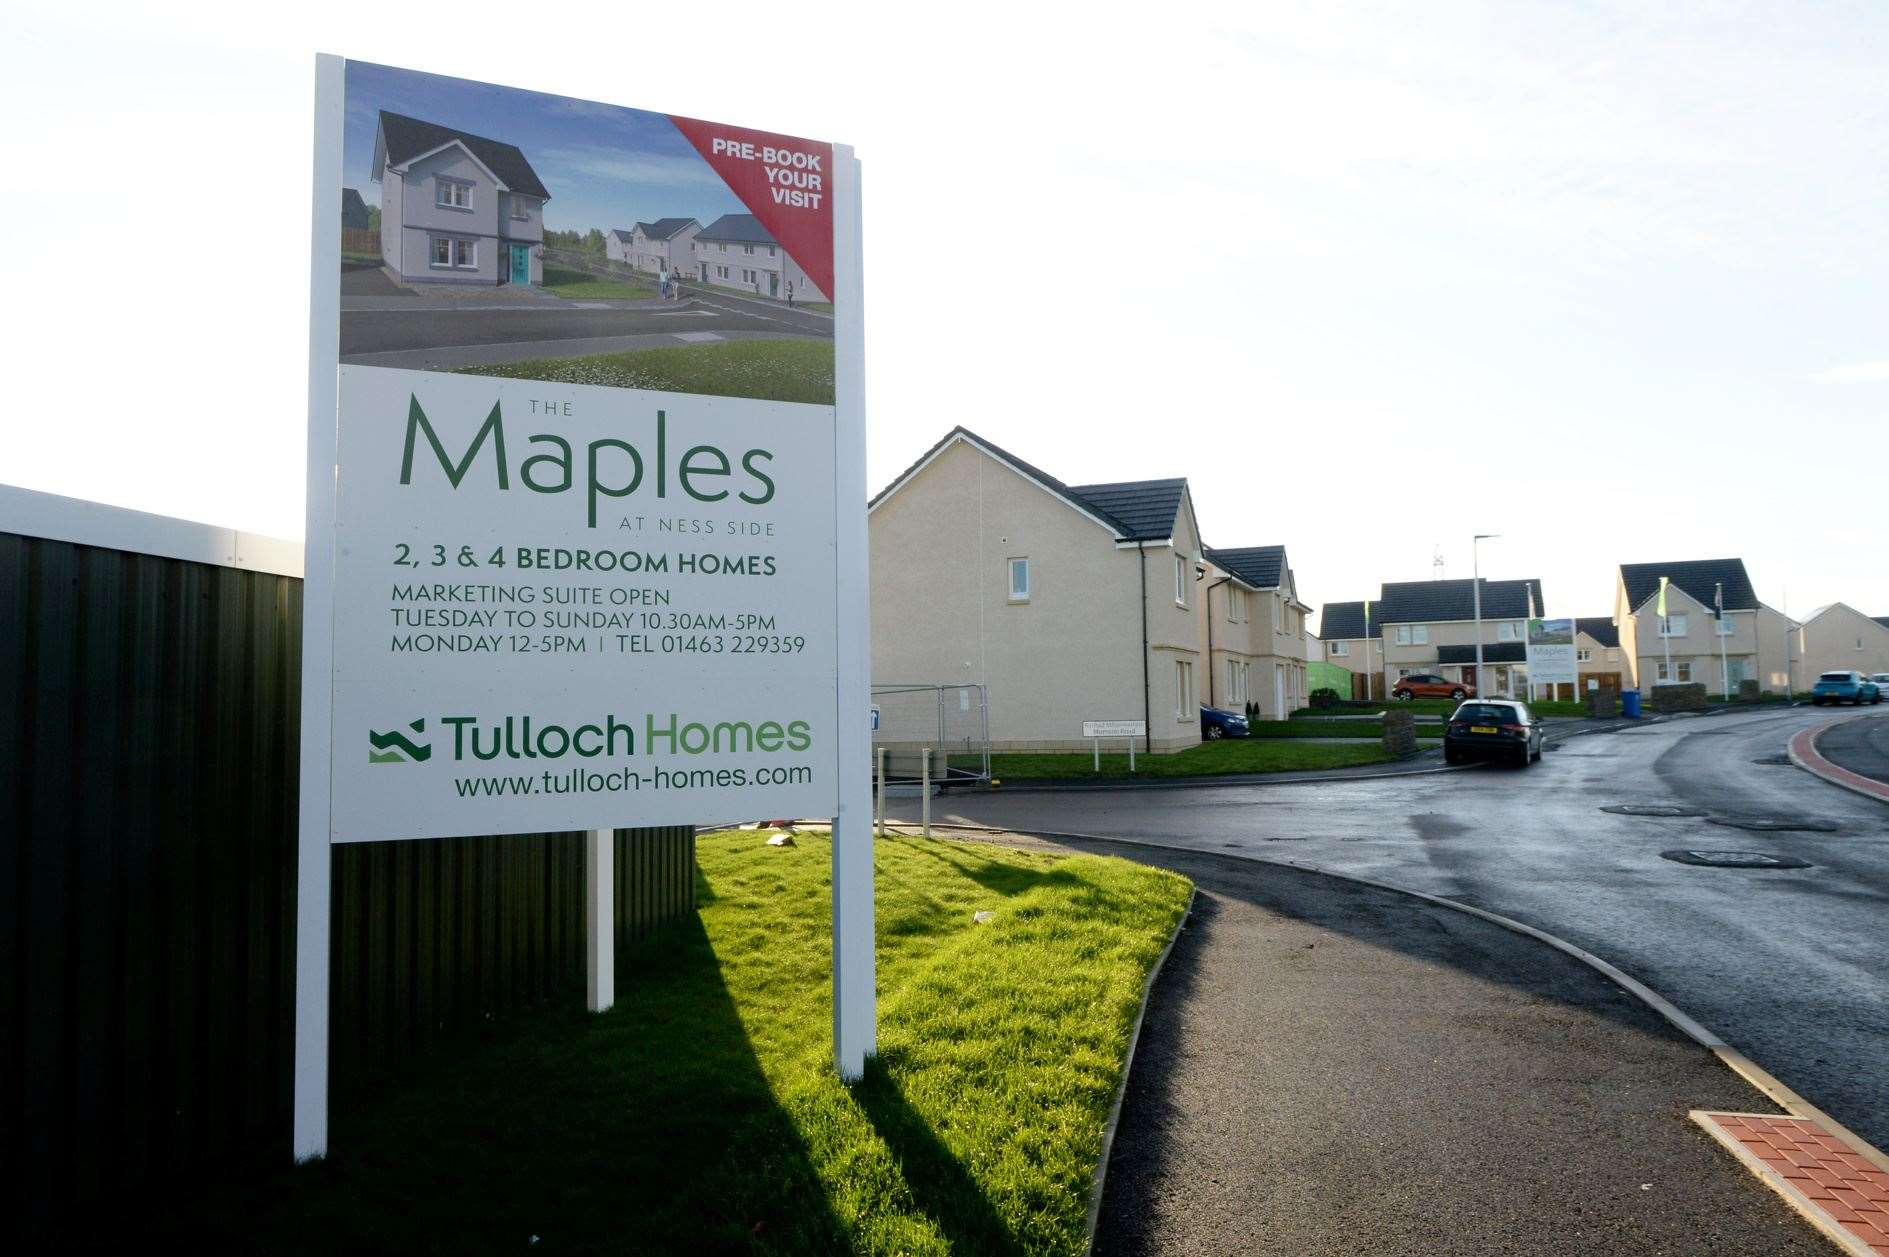 Tulloch Homes' The Maples development.